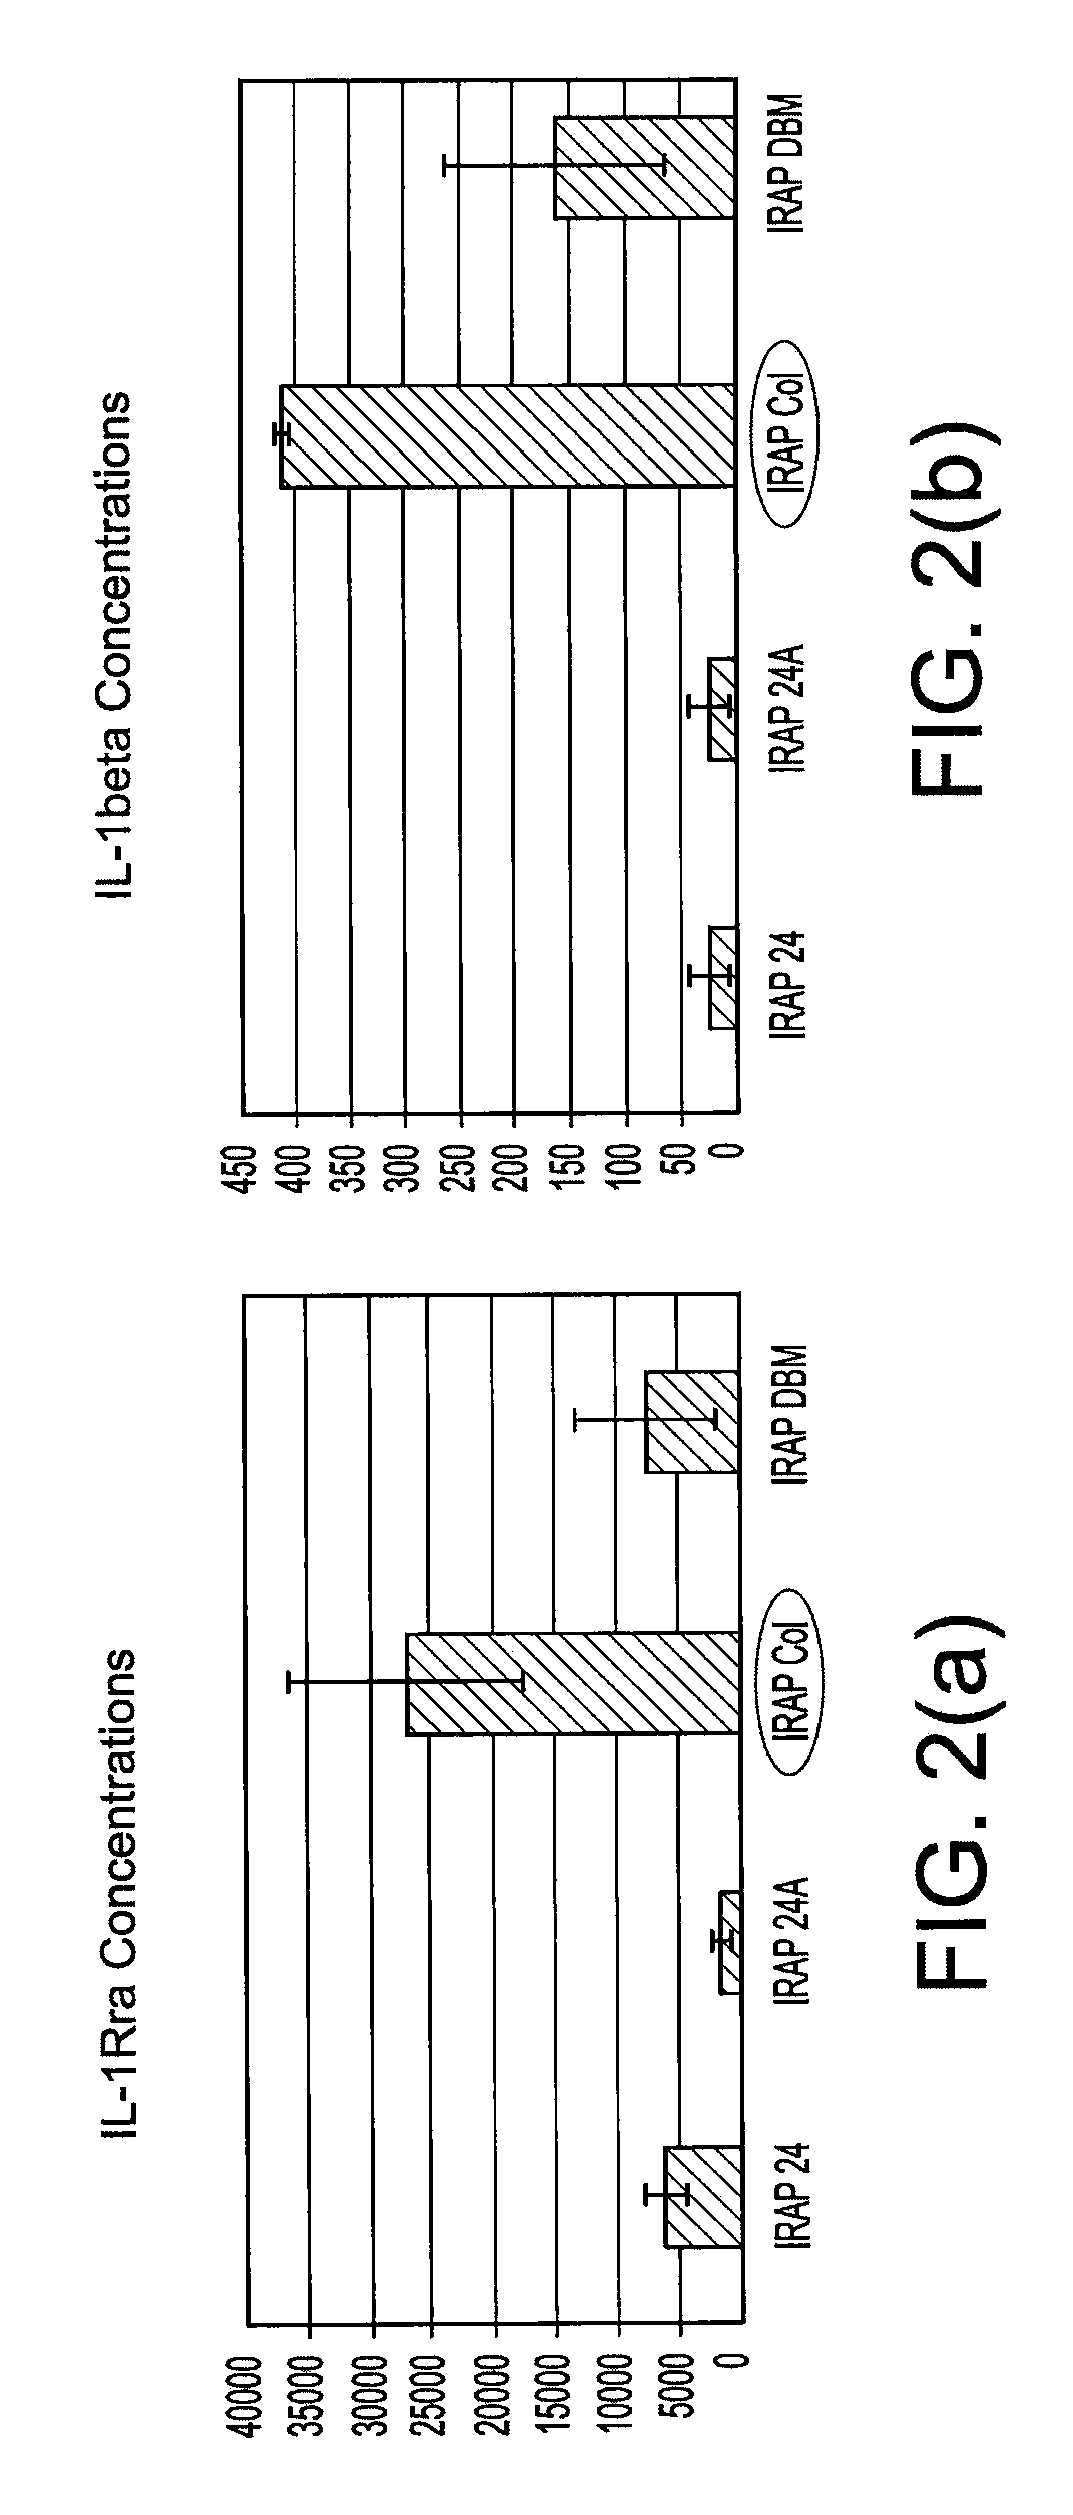 Enhanced autologous growth factor production and delivery system